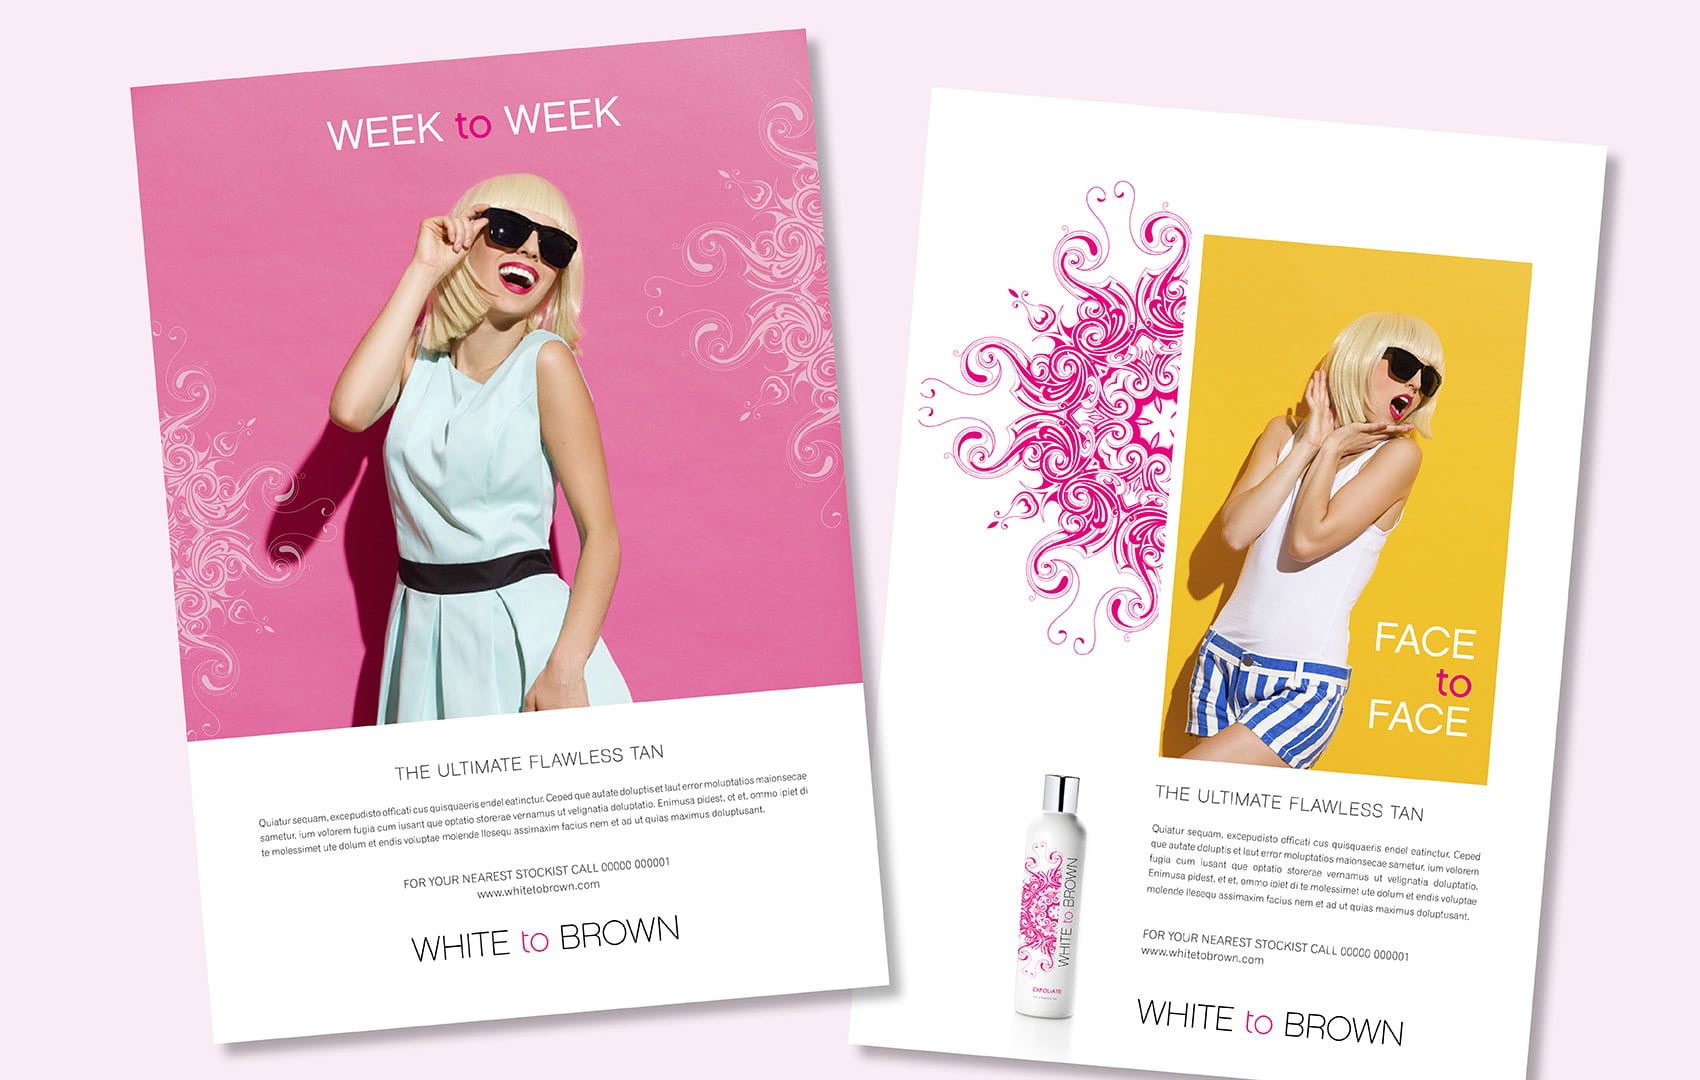 White to Brown Summer Campaign advertisements